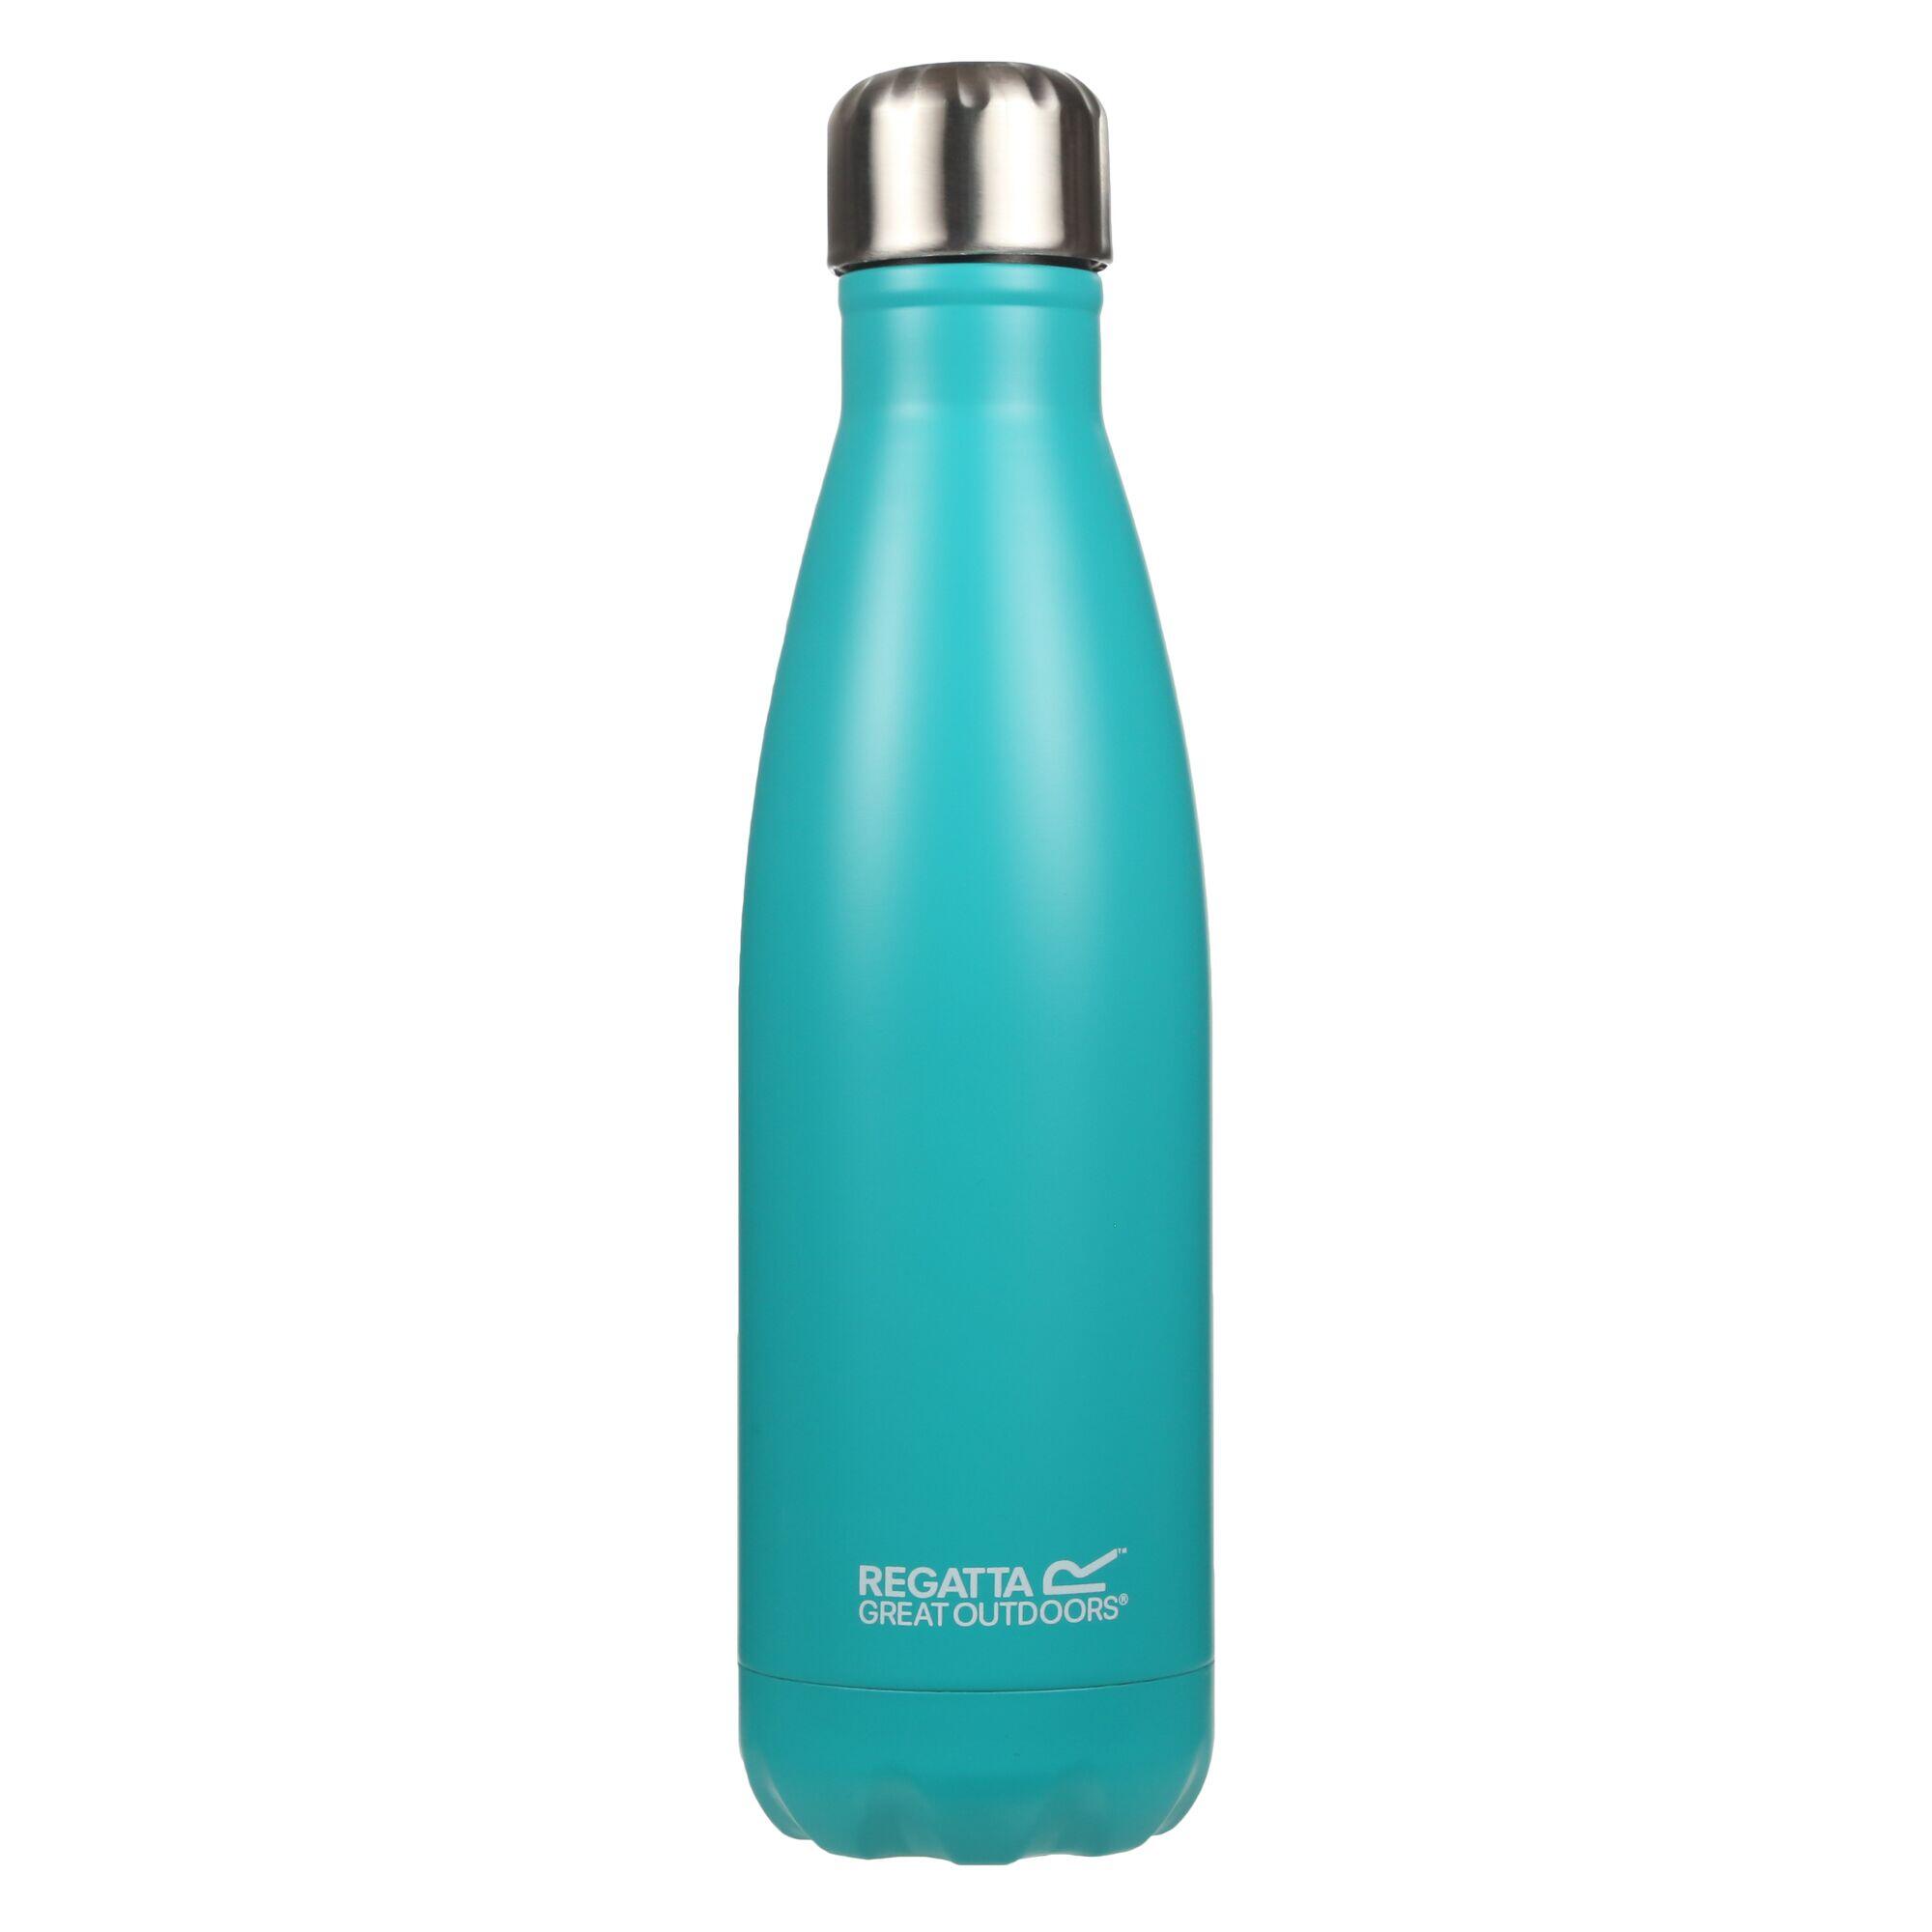 0.5L Adults' Camping Drinking Bottle - Ceramic Blue 1/5